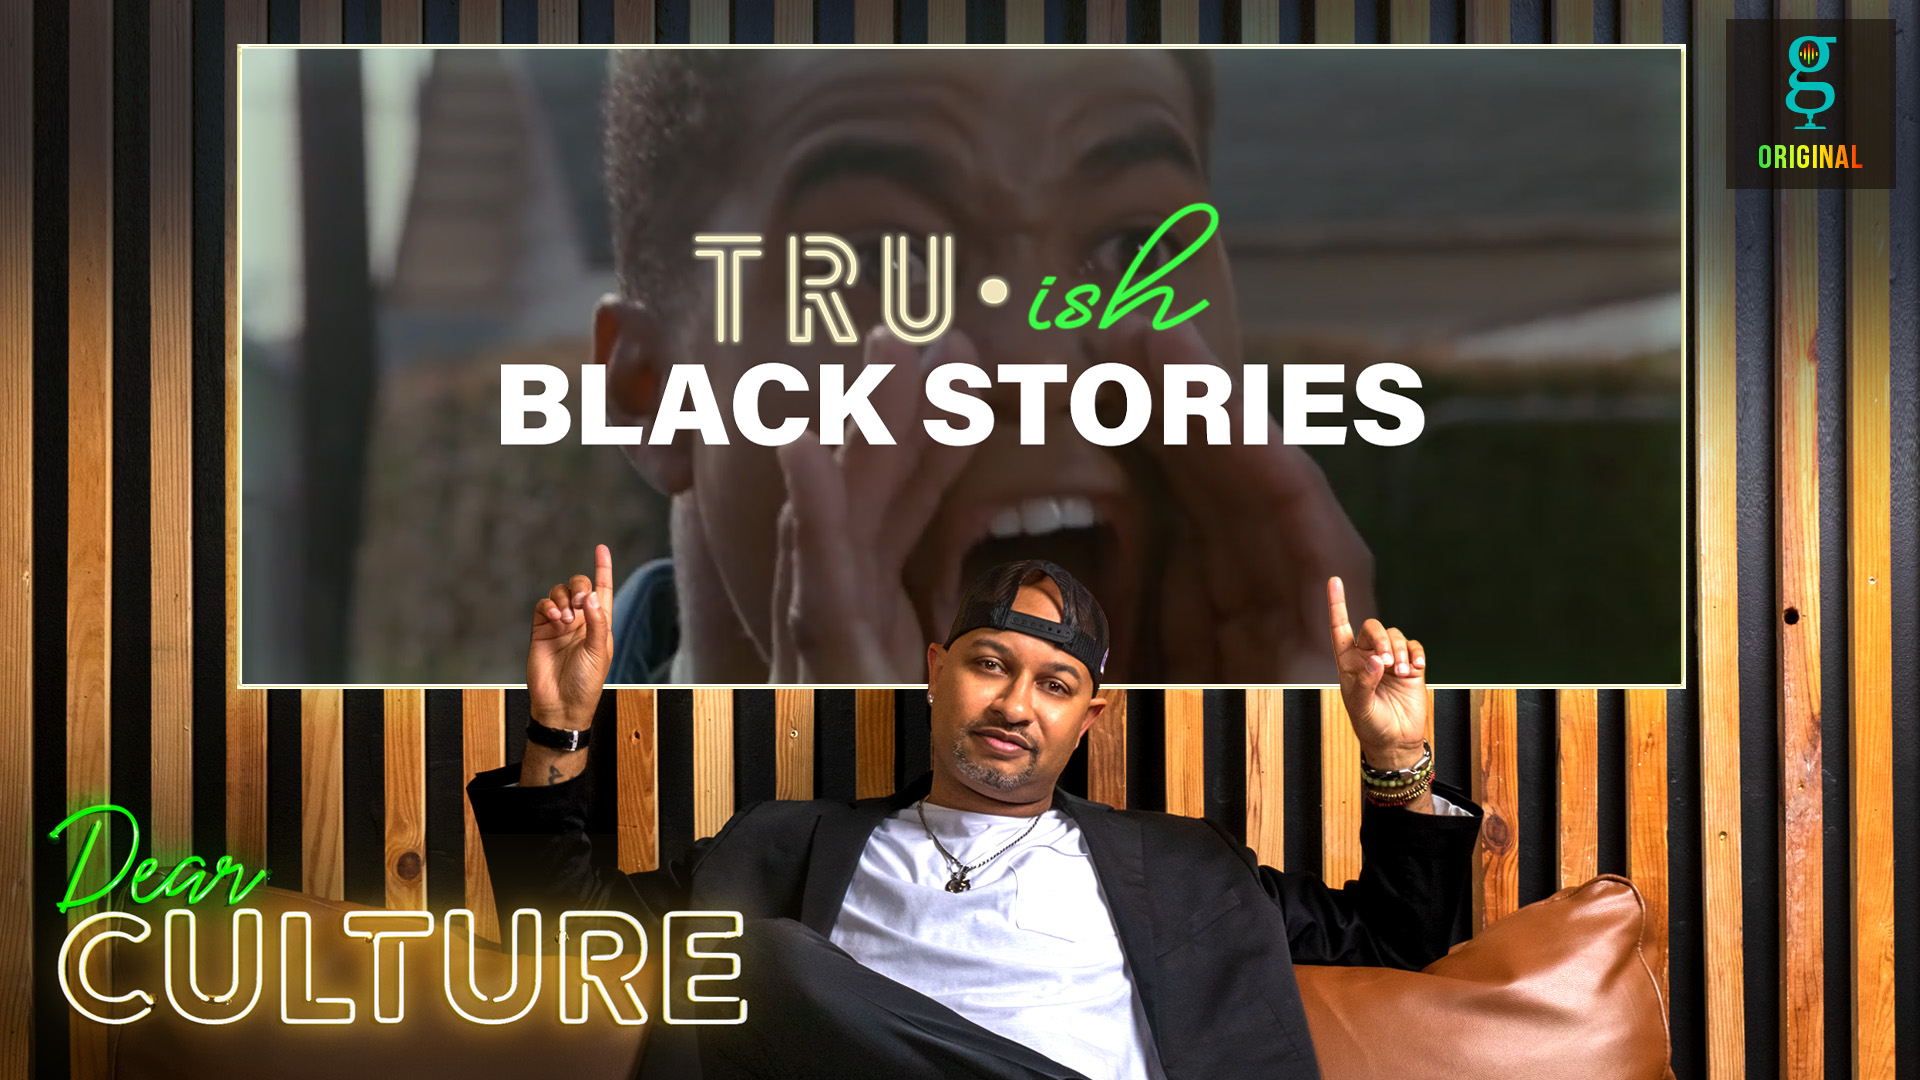 ‘Dear Cuture’ Presents ‘Tru-ish Black Stories’ for Black History Month